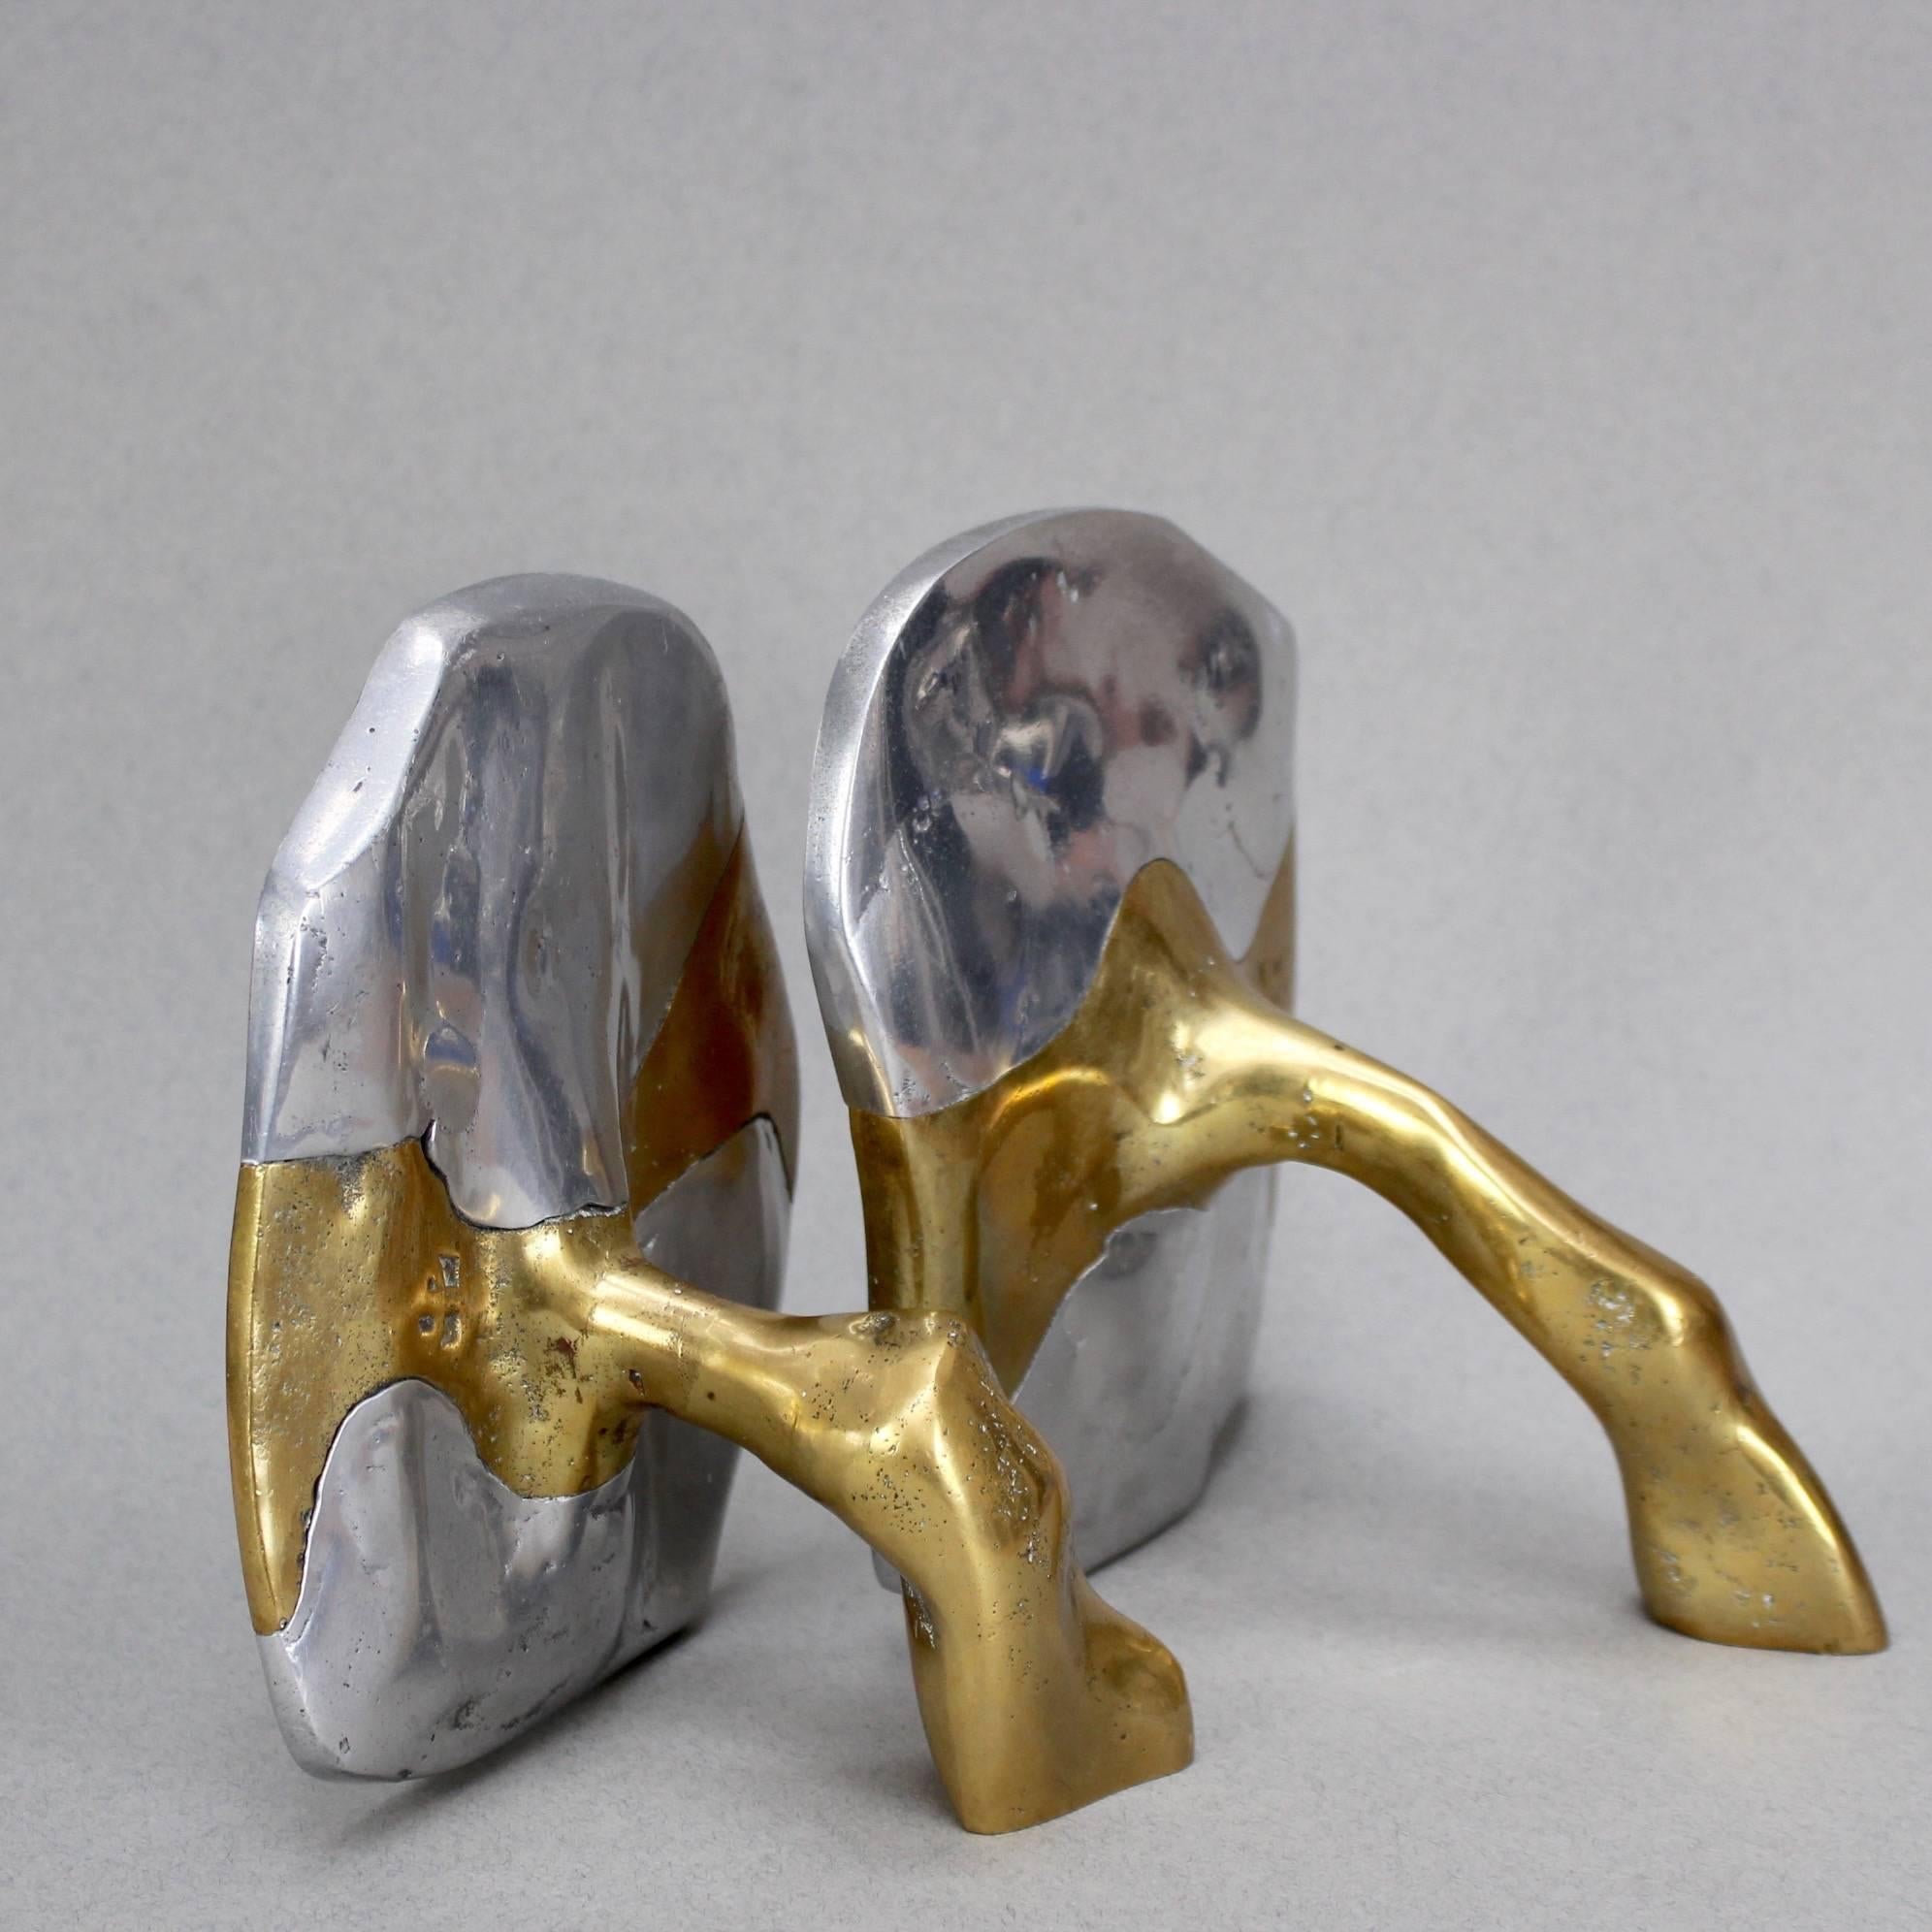 Spanish Brass and Aluminium Brutalist Style Bookends by David Marshall, circa 1970s